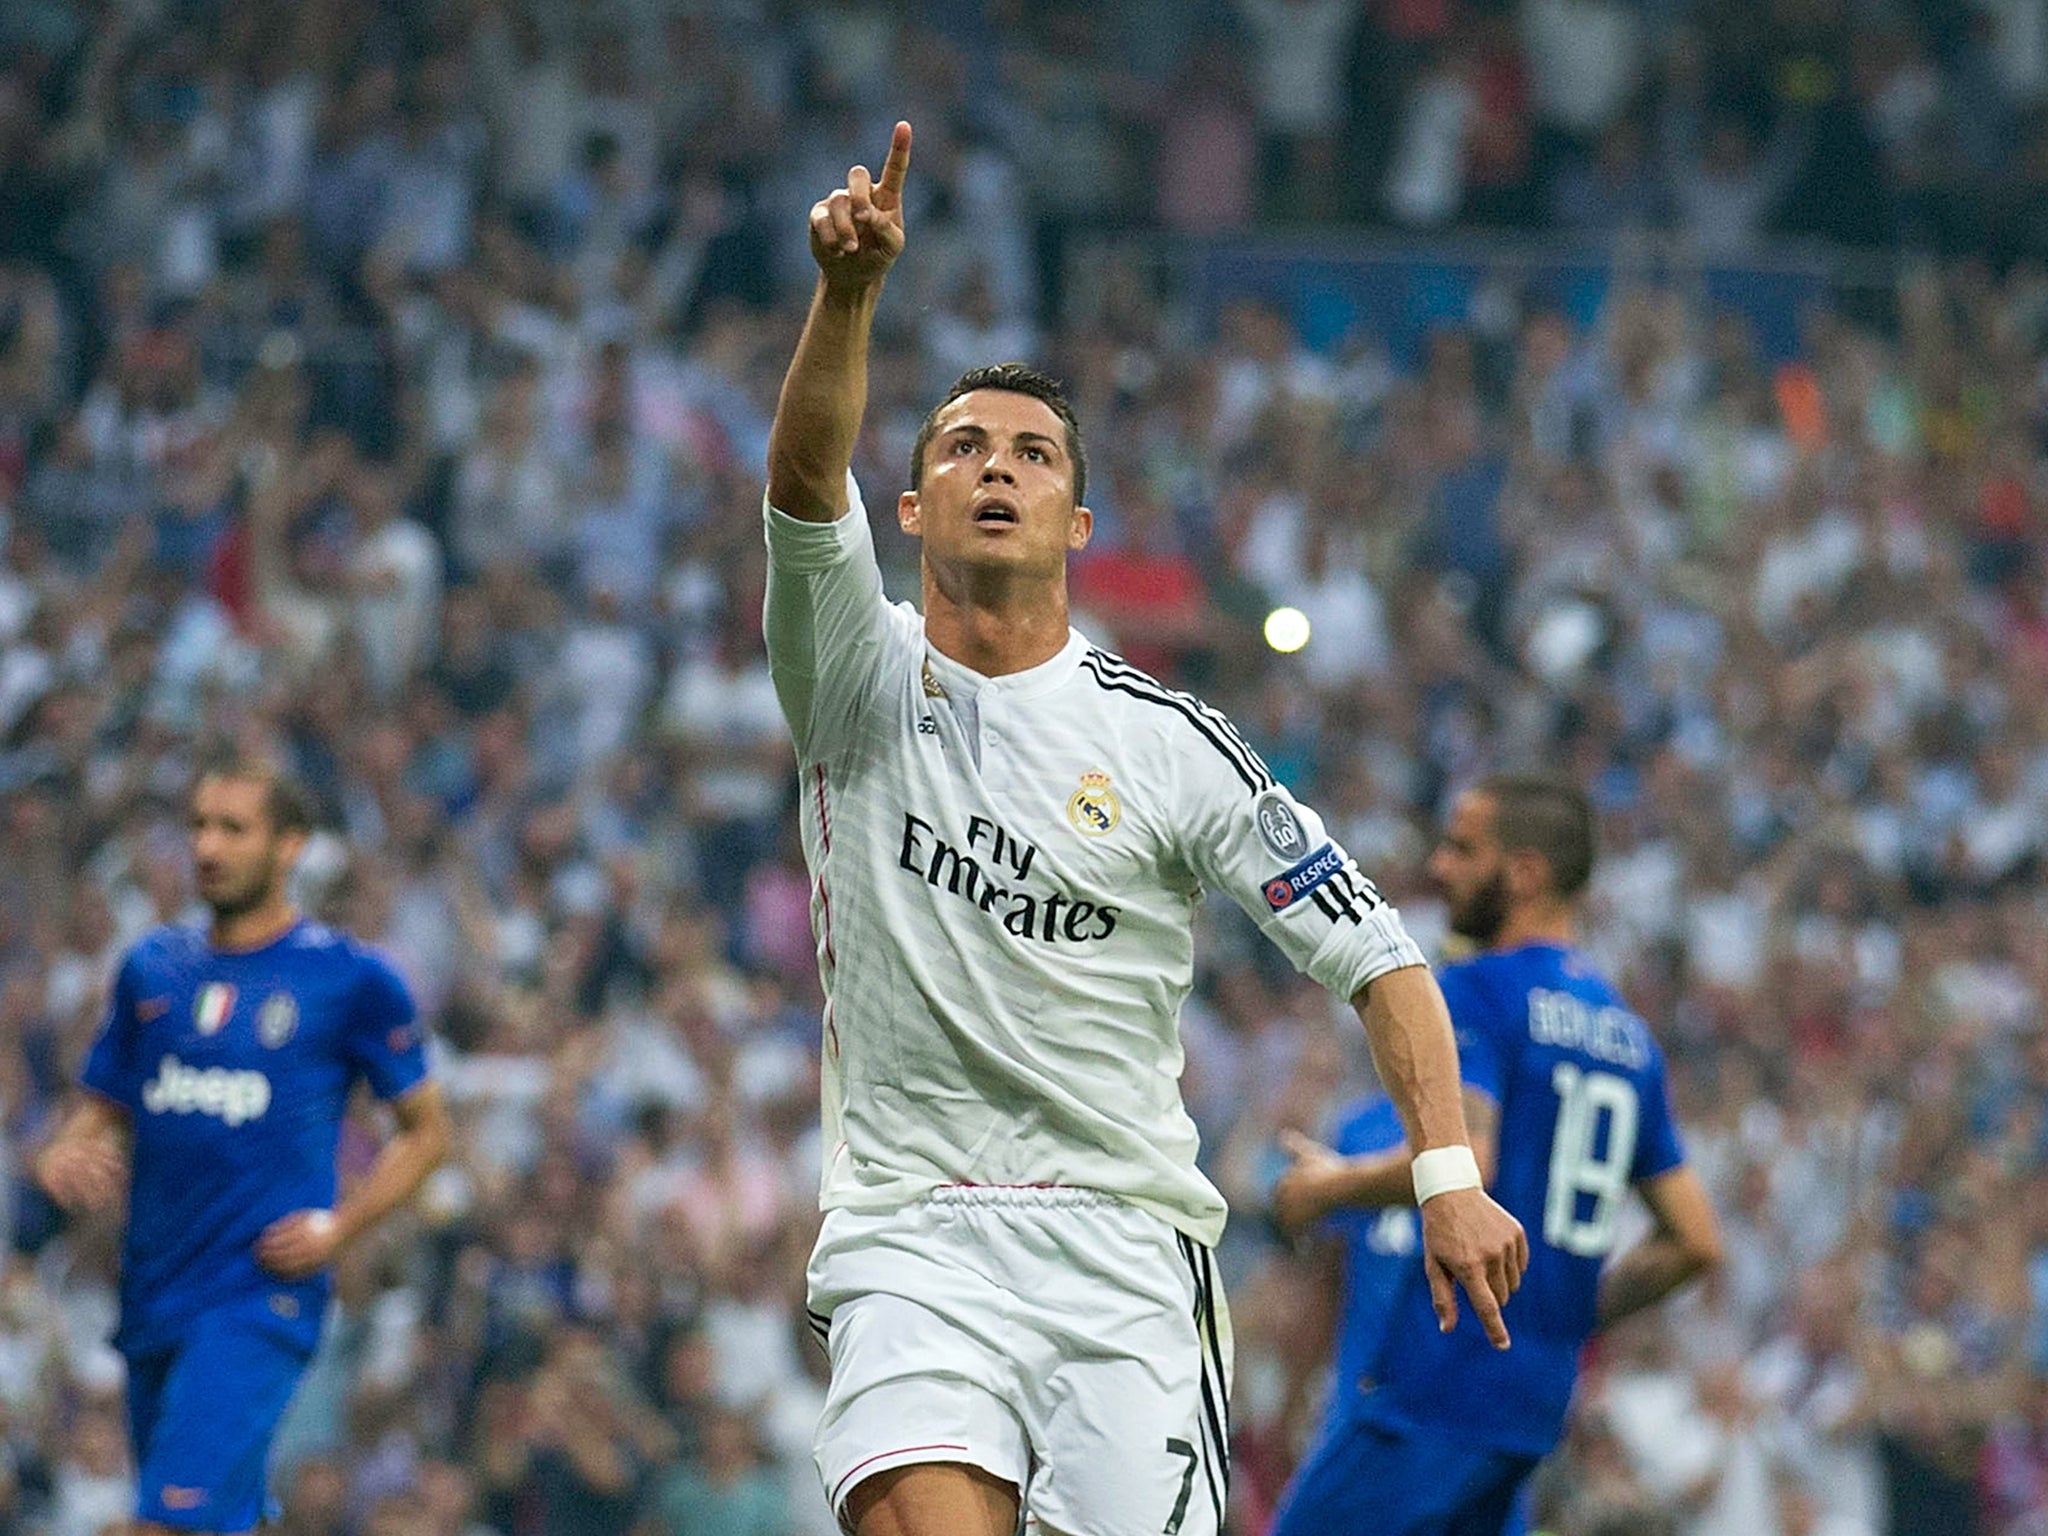 Cristiano Ronaldo is one of the world's most famous football players